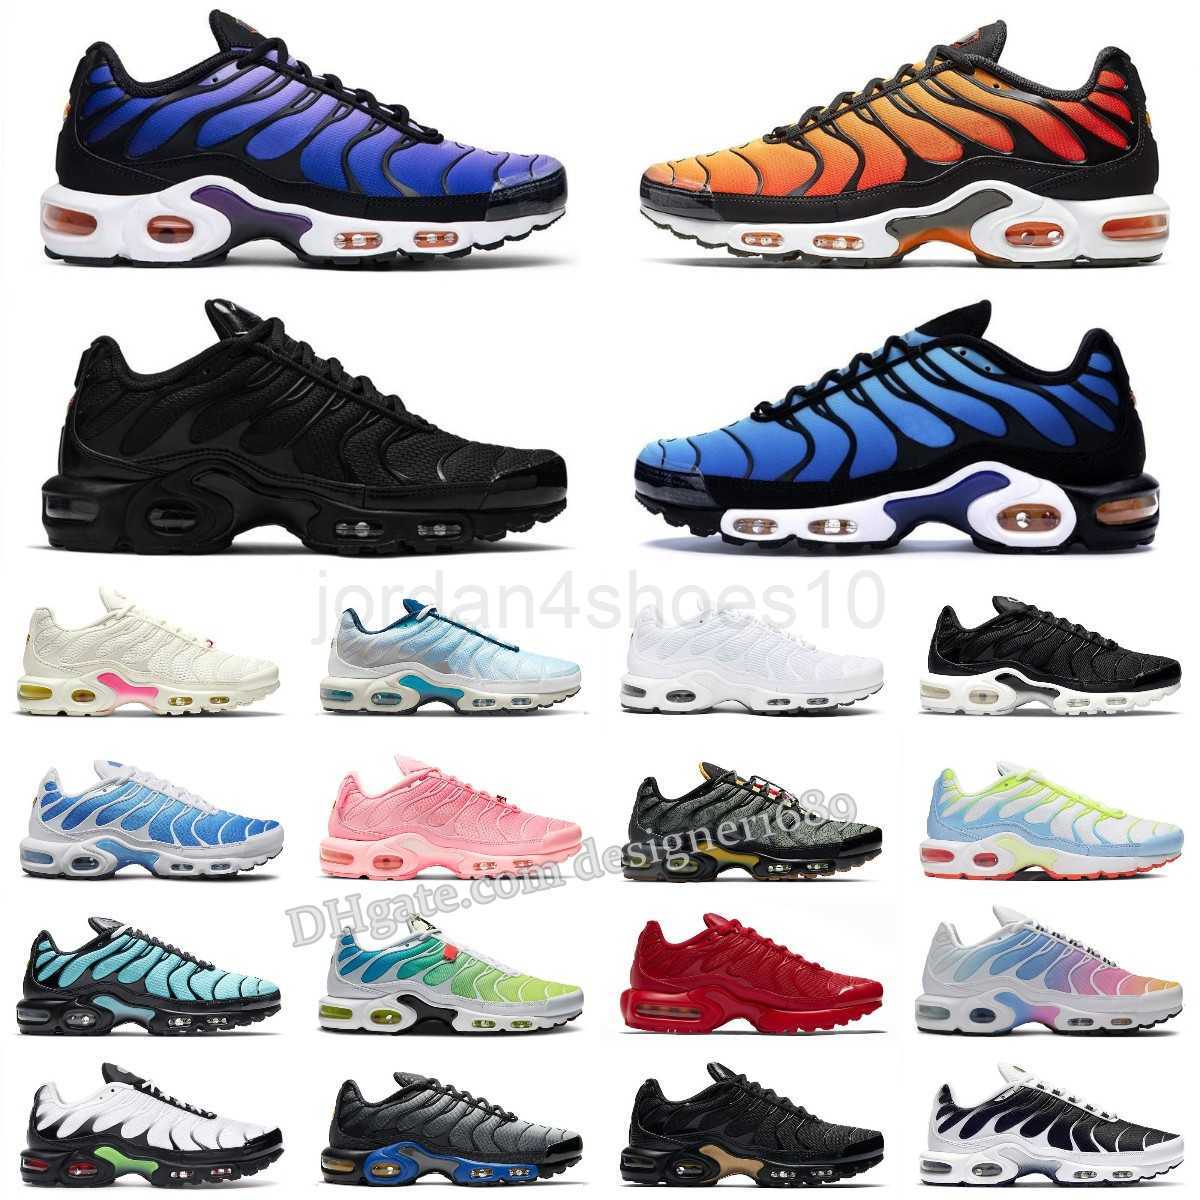 

within 3 days ship out tn plus casual shoes mens black White Sustainable Neon Green Hyper Pastel blue Burgundy Oreo women Breathable sneakers trainers outdoor 2.5, Black gold